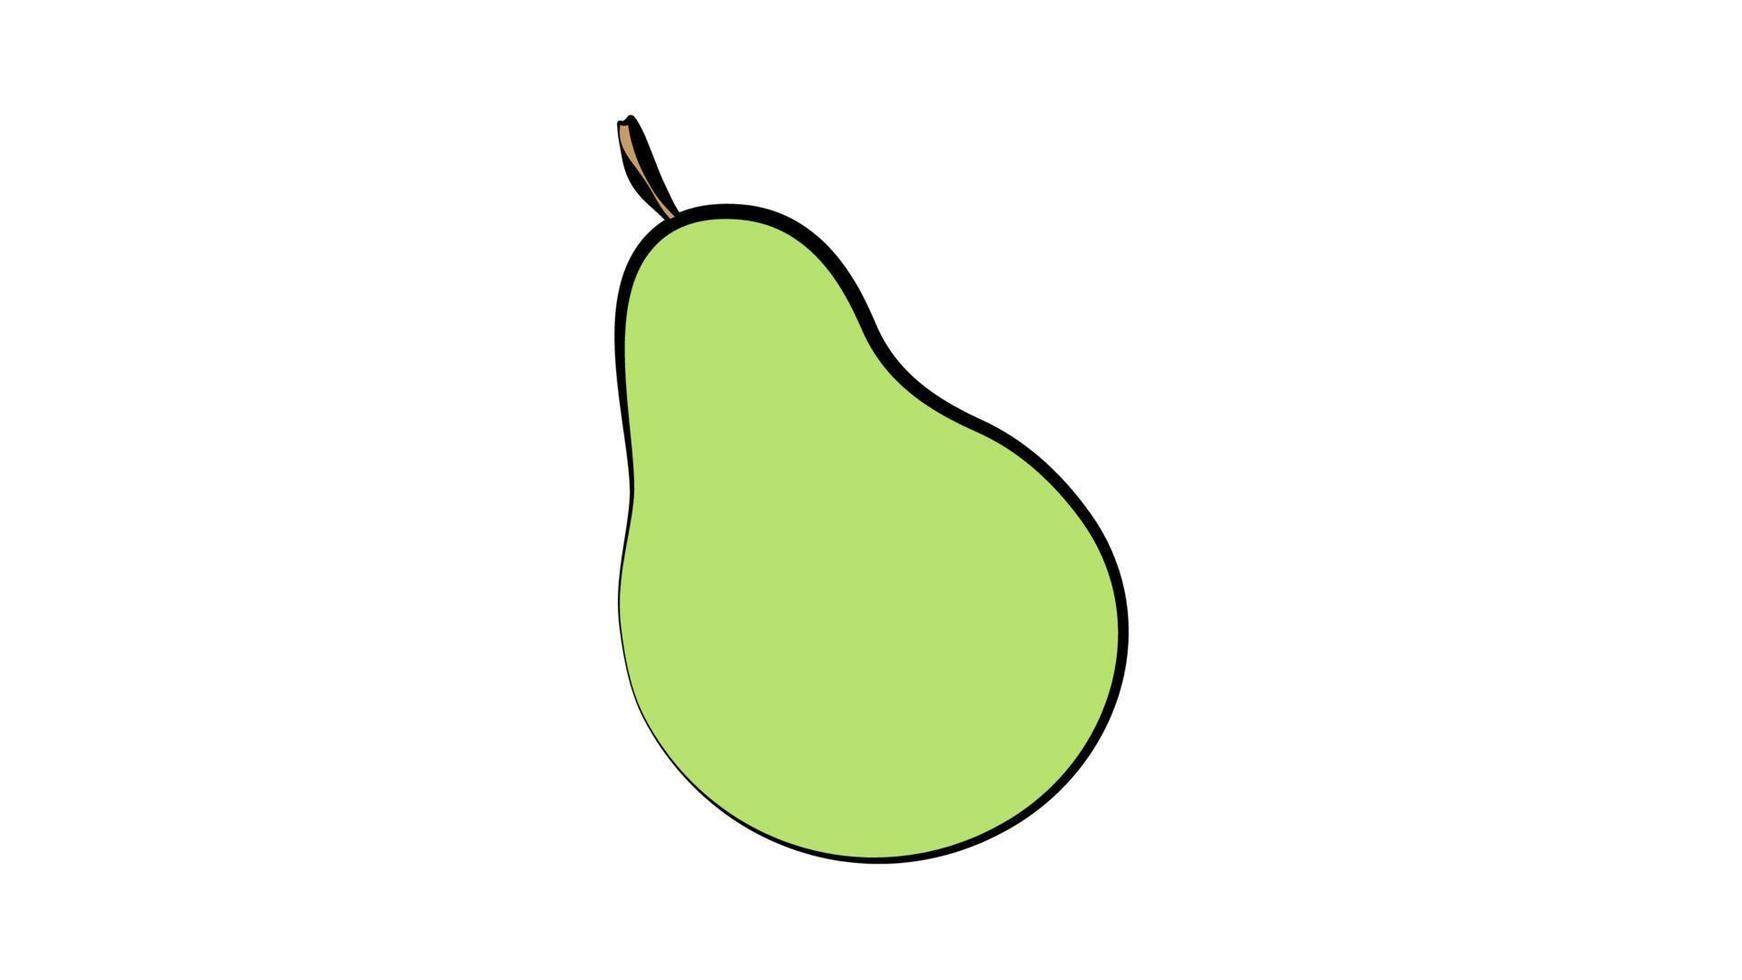 vector illustration. pear green on a white background. cute drawing with fruit. pear with a twig in the picture. illustration for a cafe